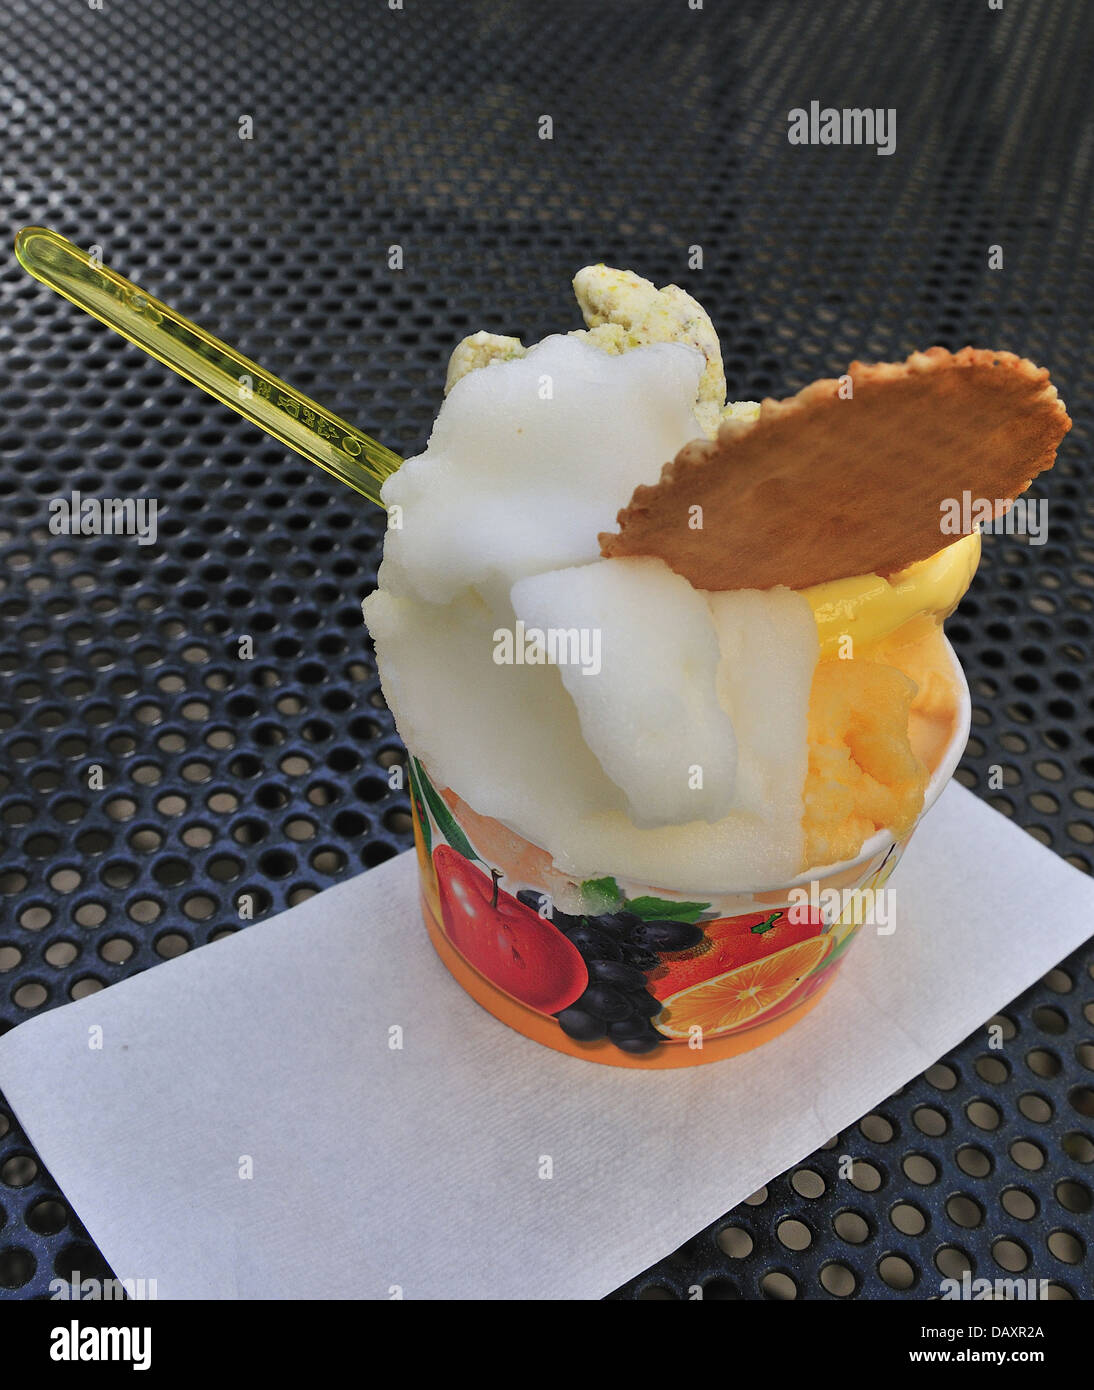 Gelato and sorbet with wafer in tub on a table bought from an Ice cream parlor Otranto, Southern Italy Stock Photo